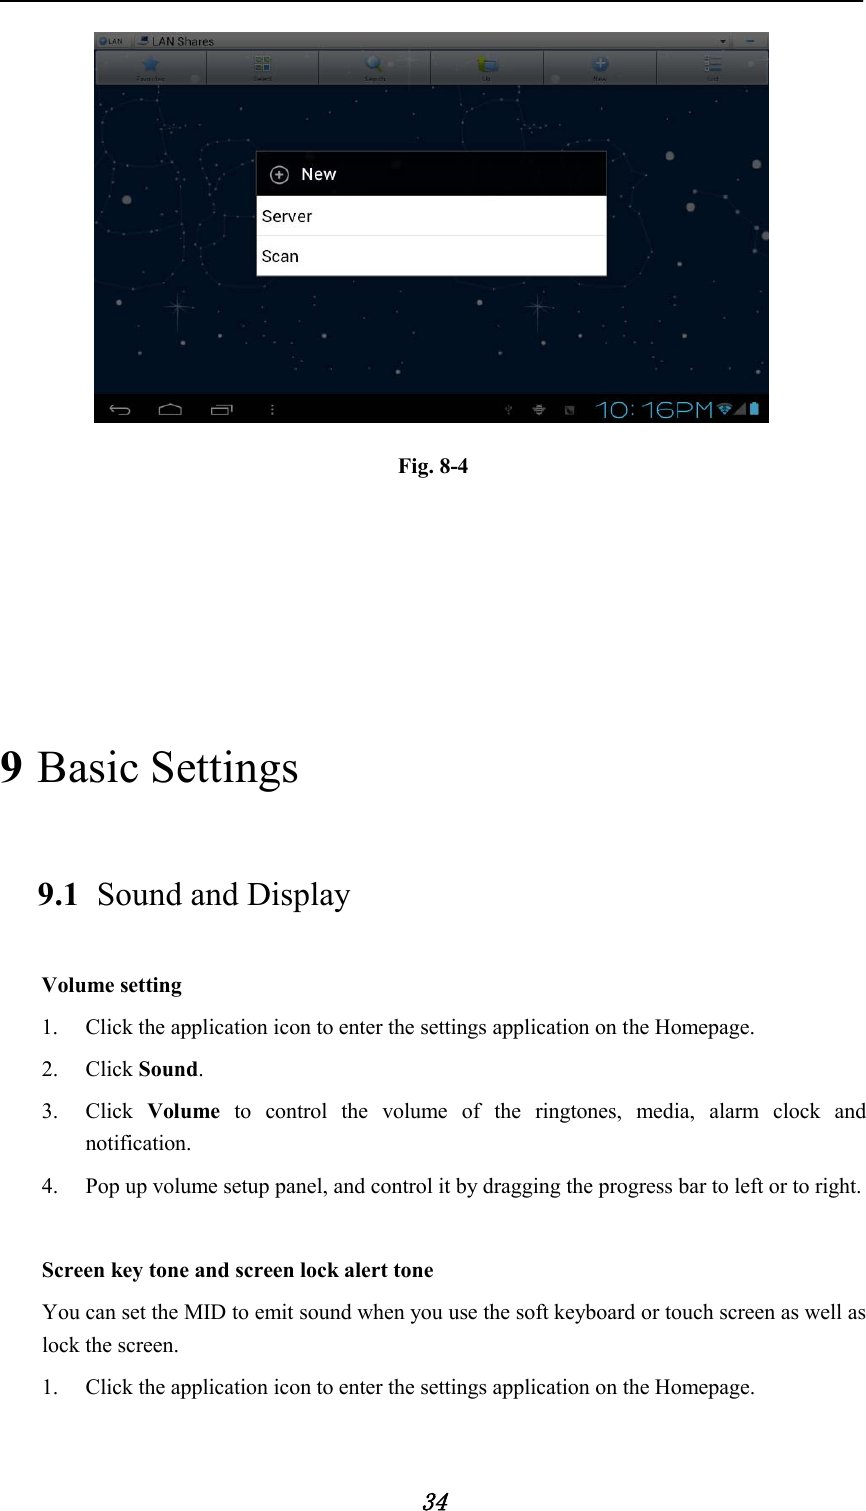            34               Fig. 8-4     9 Basic Settings 9.1 Sound and Display Volume setting 1. Click the application icon to enter the settings application on the Homepage. 2. Click Sound. 3. Click  Volume to control the volume of the ringtones, media, alarm clock and notification. 4. Pop up volume setup panel, and control it by dragging the progress bar to left or to right.    Screen key tone and screen lock alert tone You can set the MID to emit sound when you use the soft keyboard or touch screen as well as lock the screen. 1. Click the application icon to enter the settings application on the Homepage. 